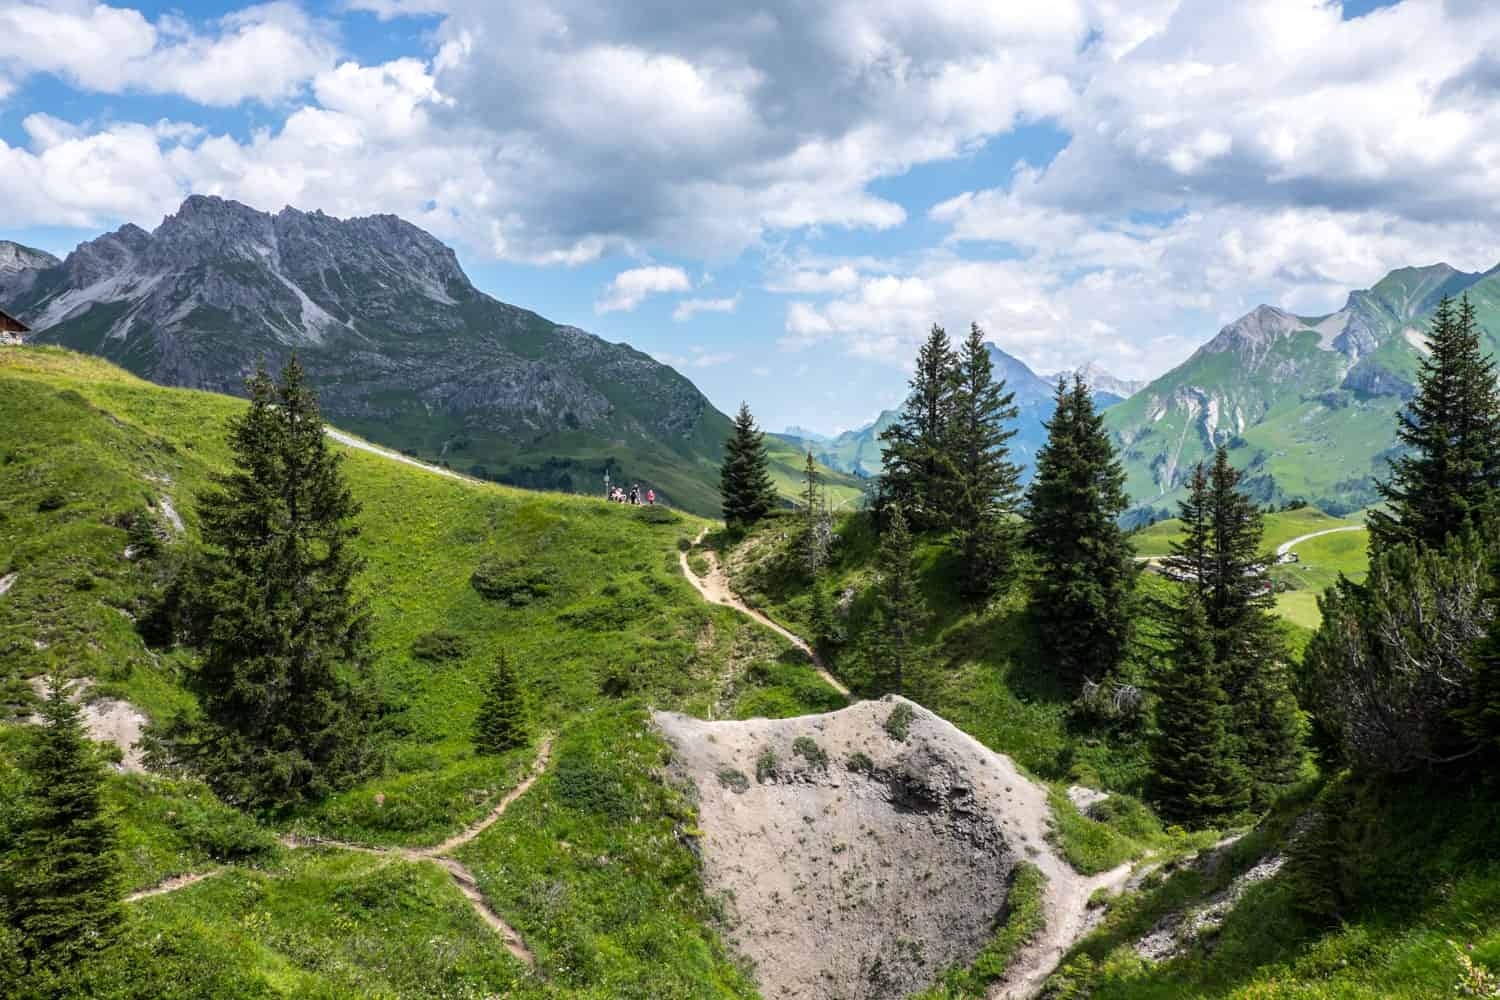 From ski slopes to hilly hiking trails in Lech, Austria